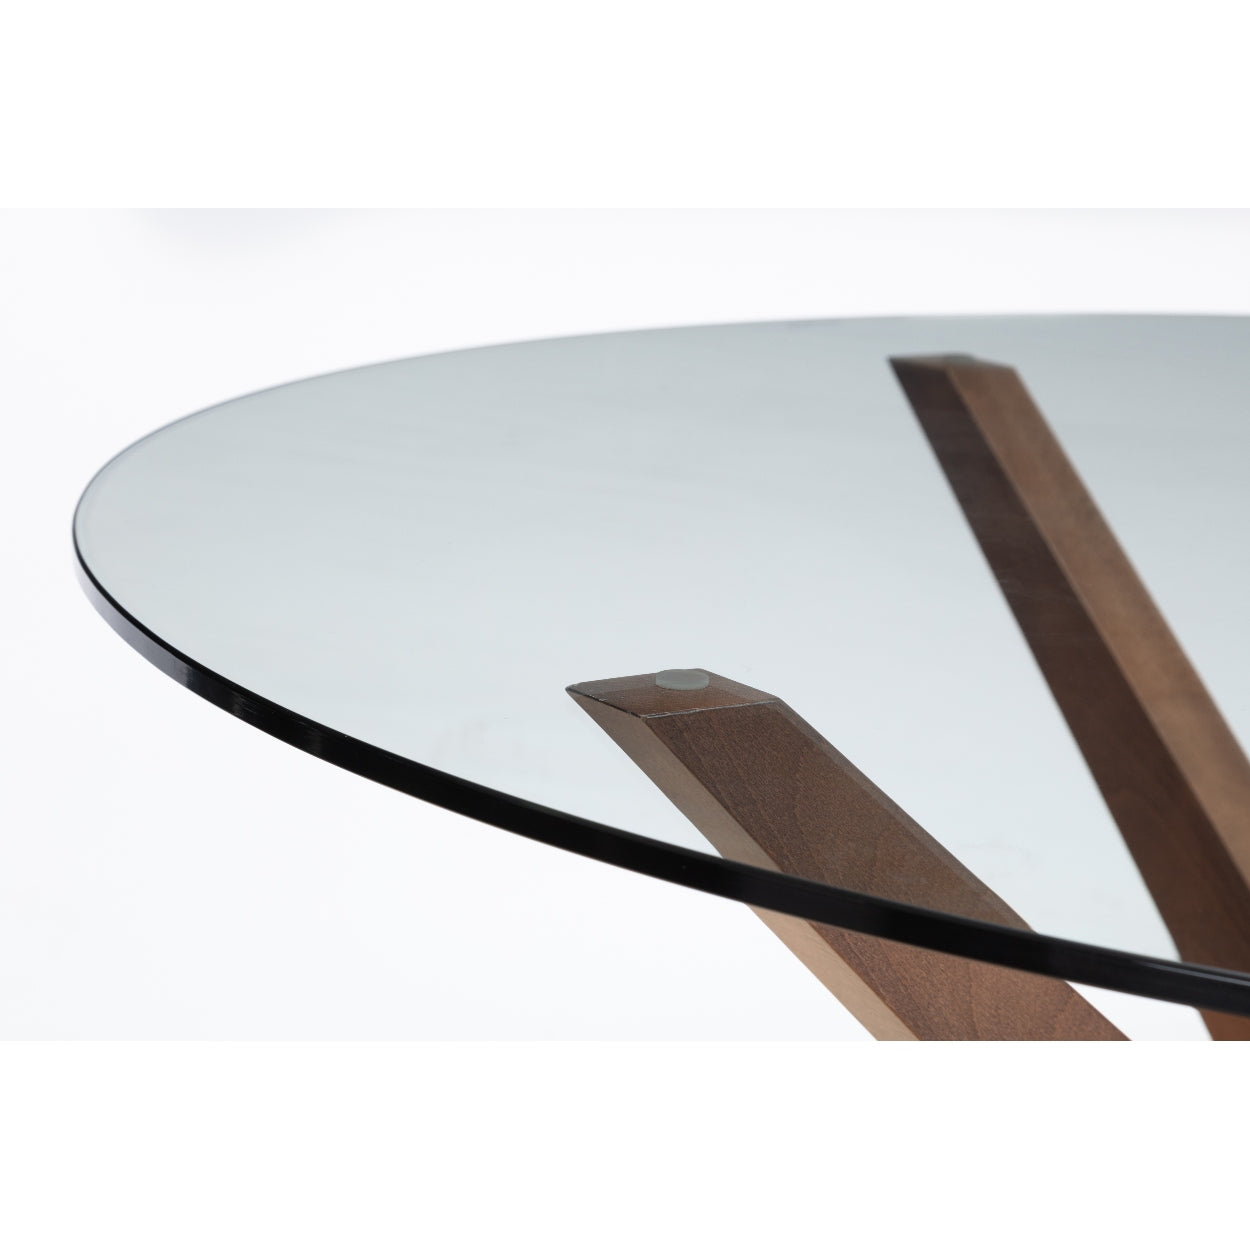 Chelsea Large Round Glass Dining Table